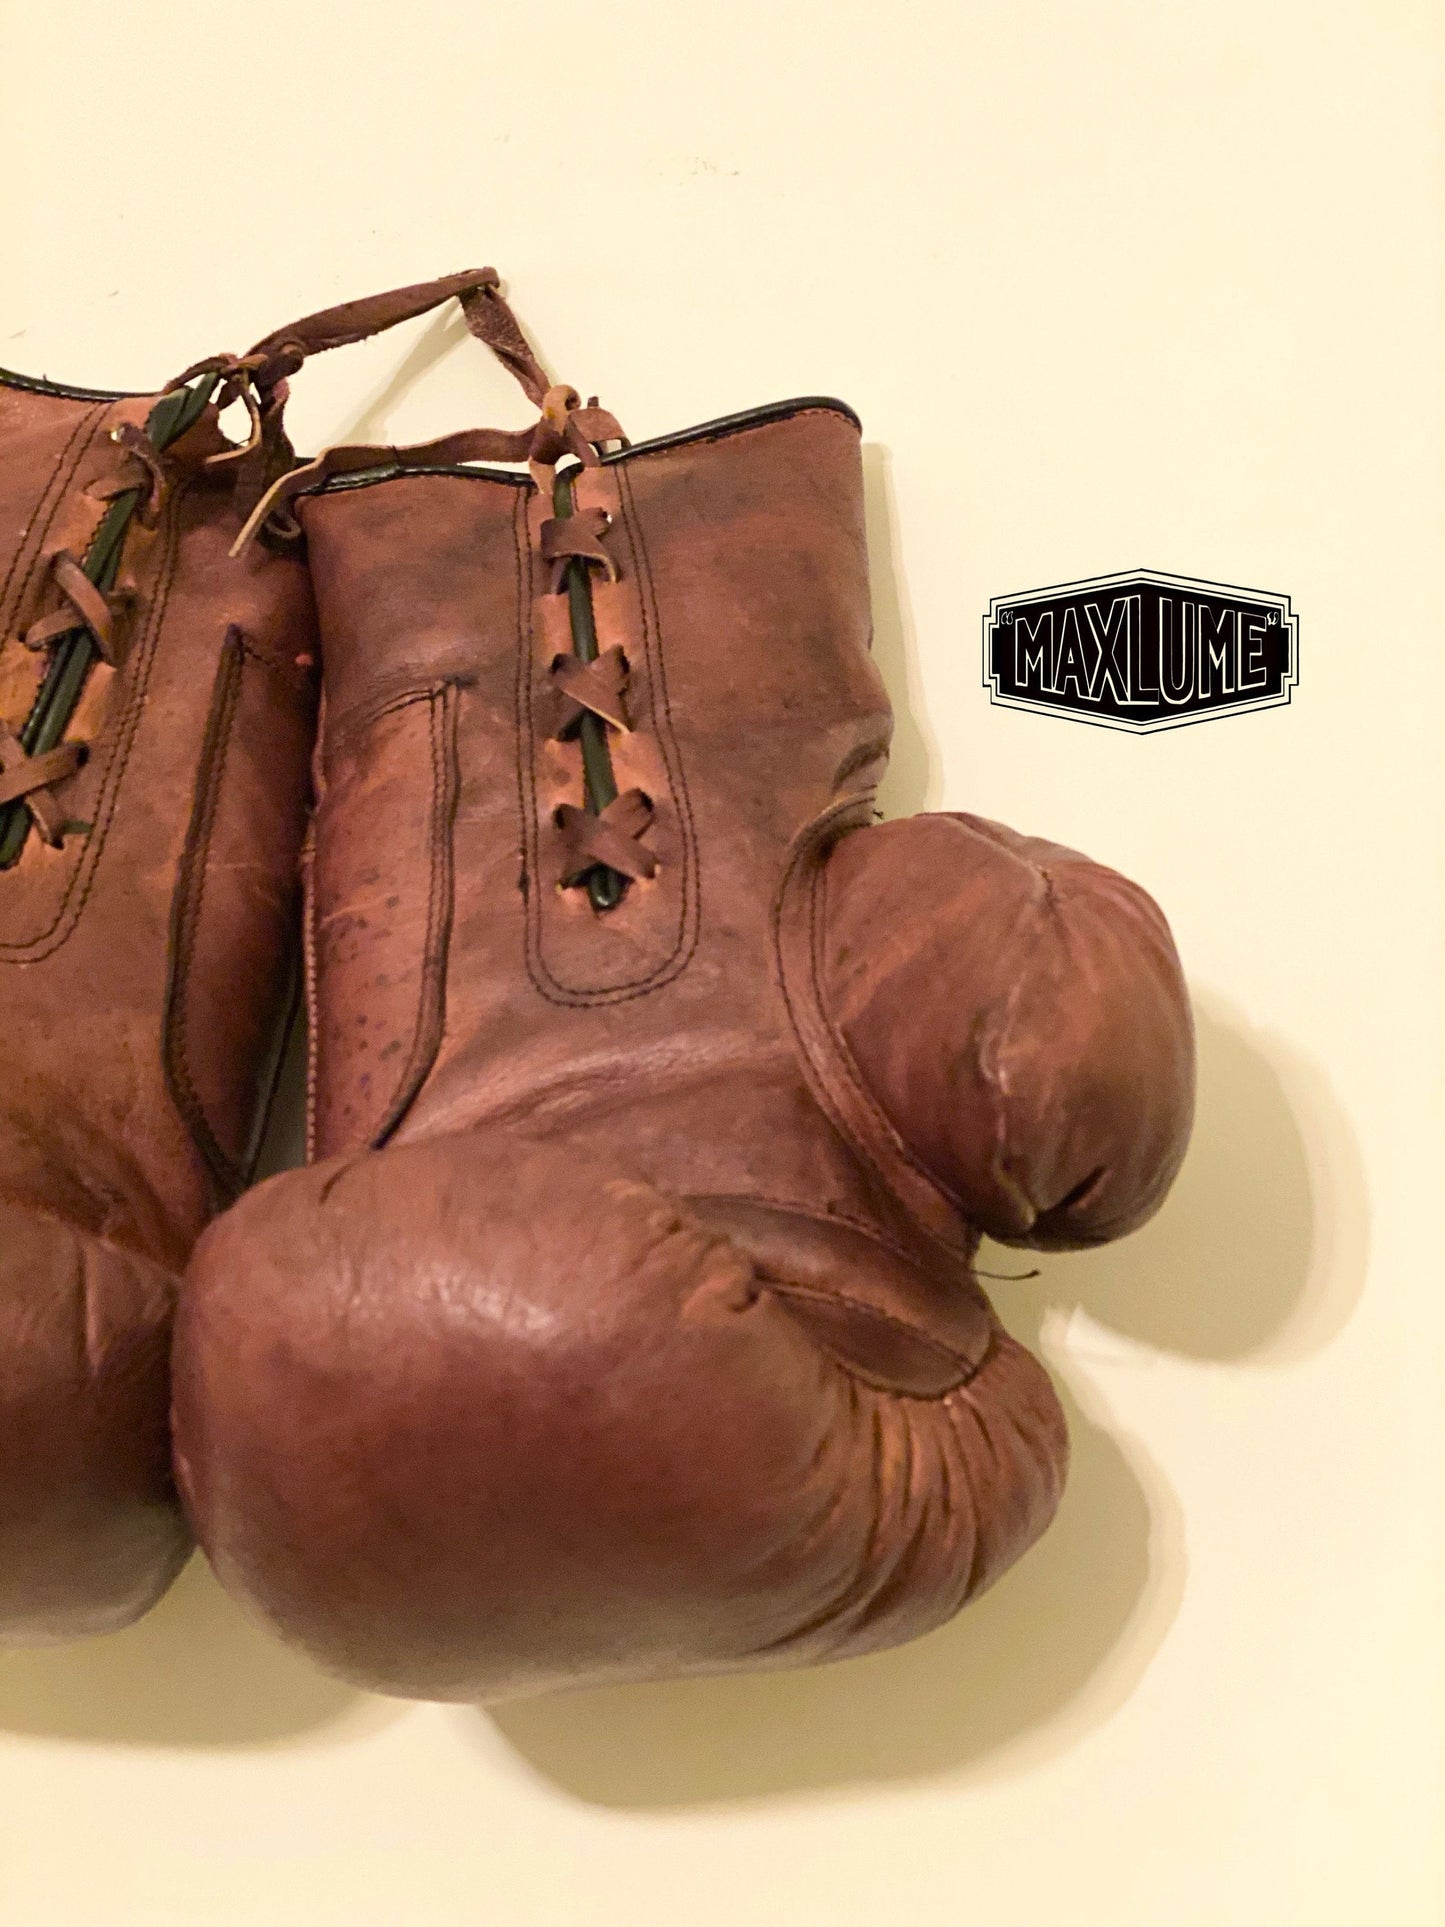 Maxlume ~ Genuine Leather Vintage Retro Lace Up Brown Boxing Gloves Heritage